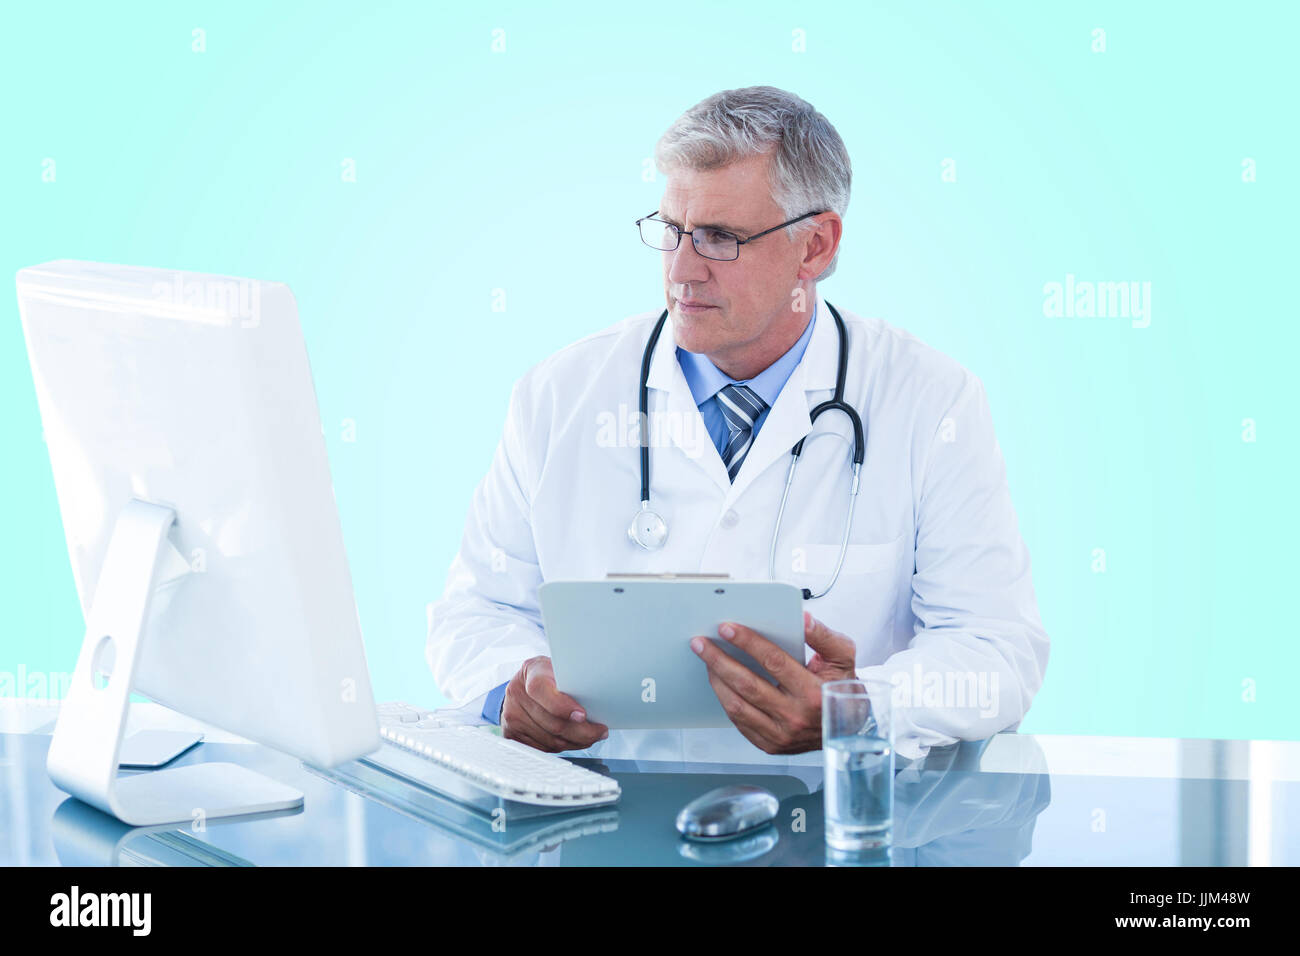 Composite 3d image of male doctor holding clipboard while looking at computer monitor Stock Photo